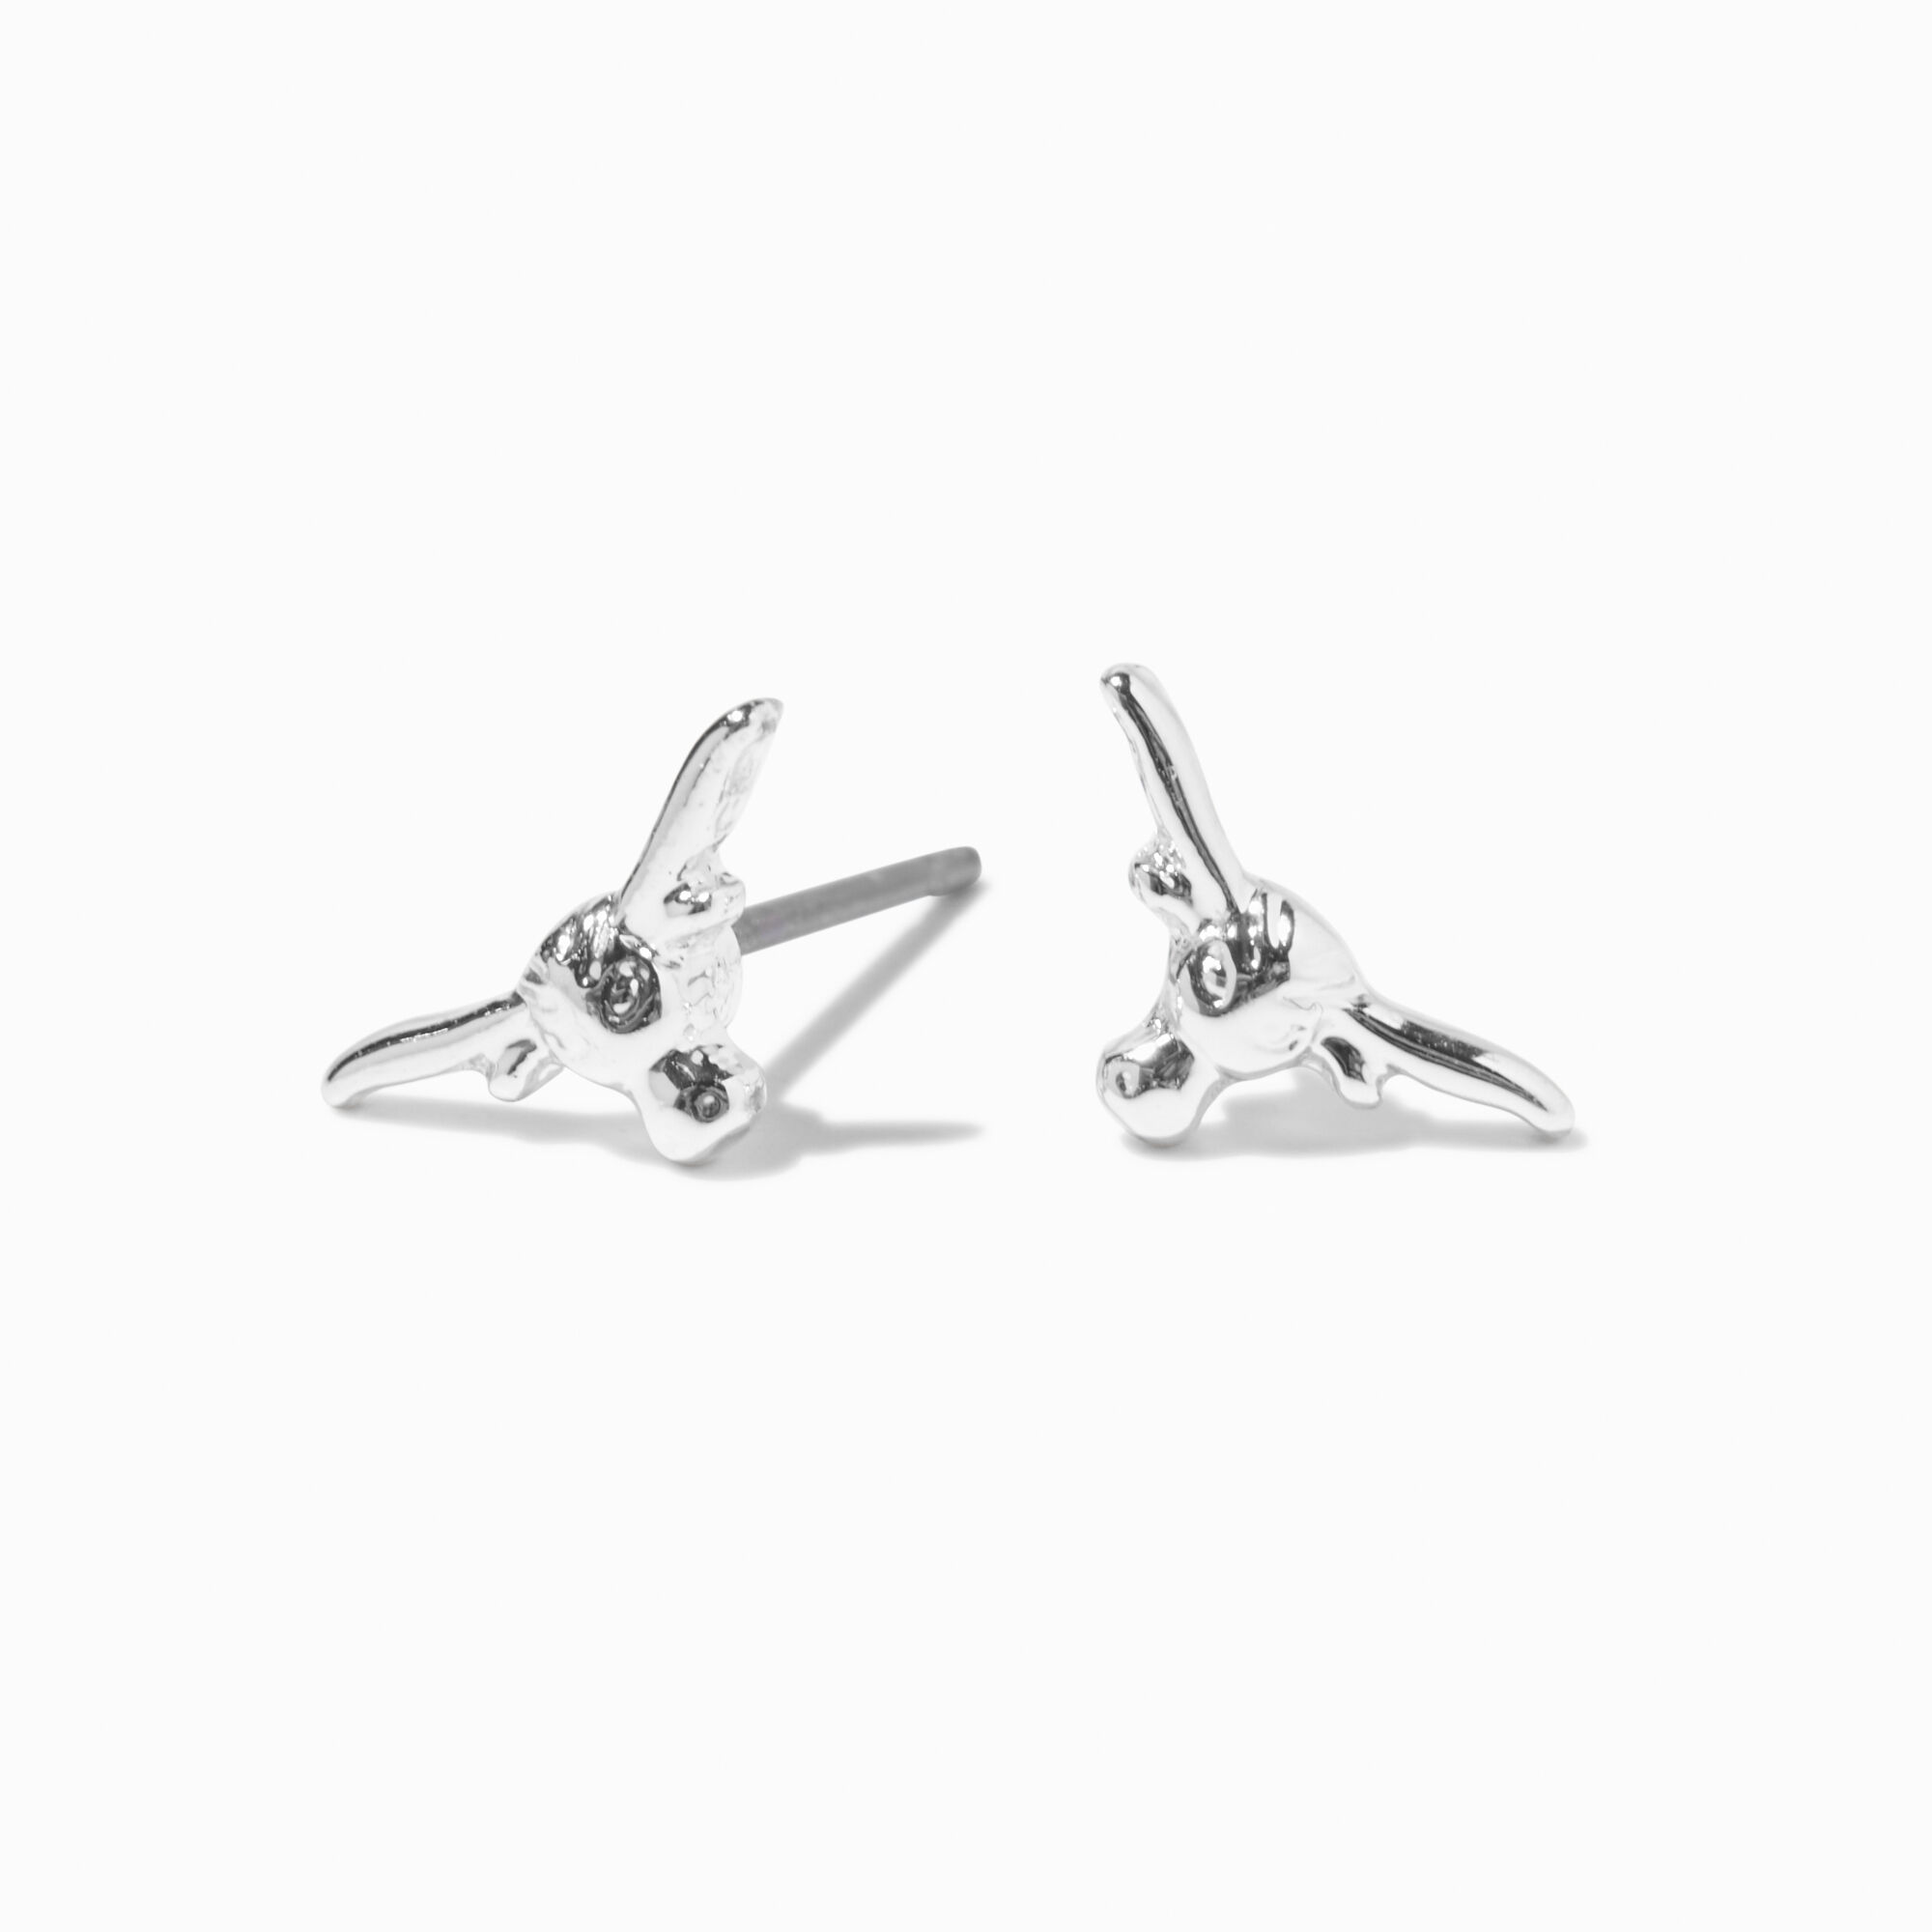 View Claires Tone Bull Stud Earrings Silver information